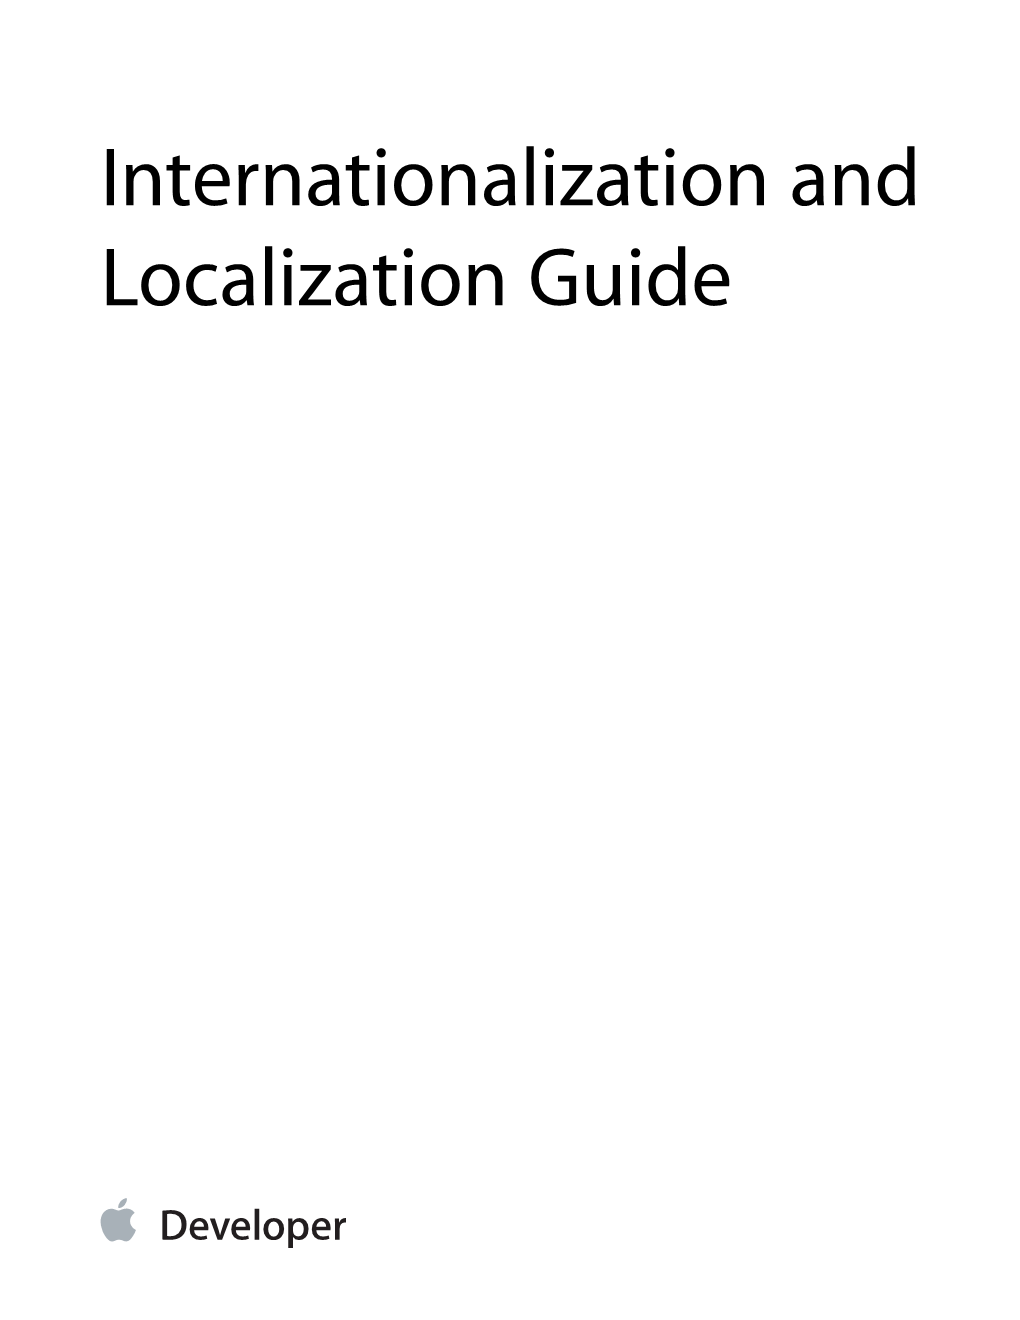 Internationalization and Localization Guide Contents